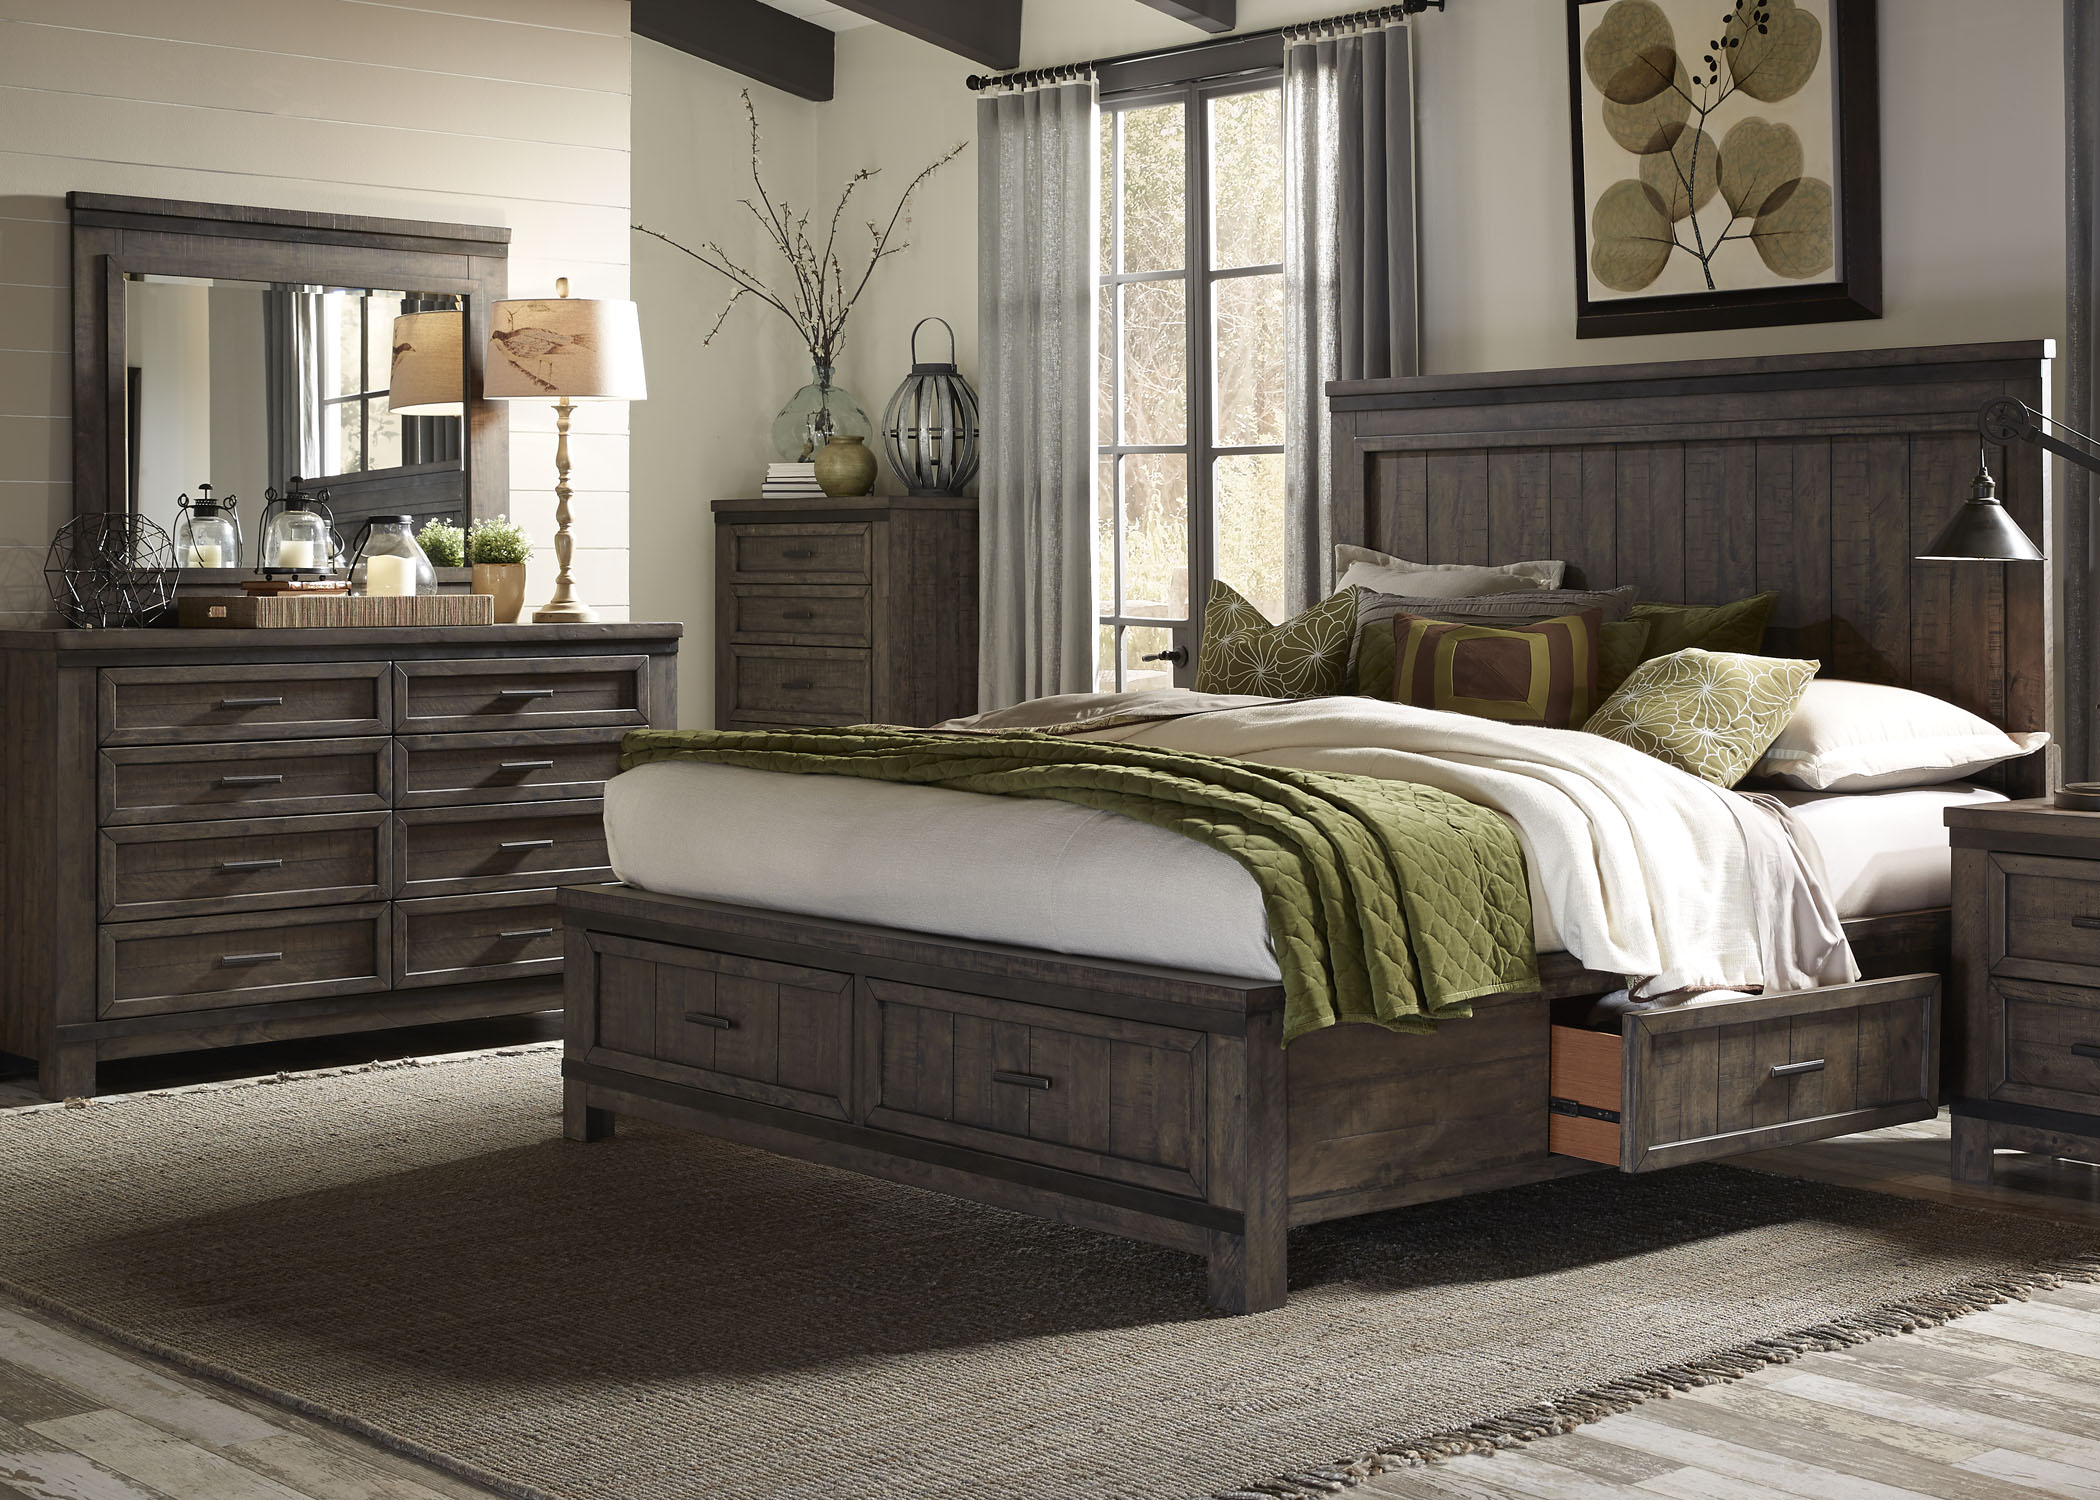 Liberty Furniture Thornwood Hills Bedroom King Two Sided Storage Bed, Dresser, Mirror, and Chest Collection